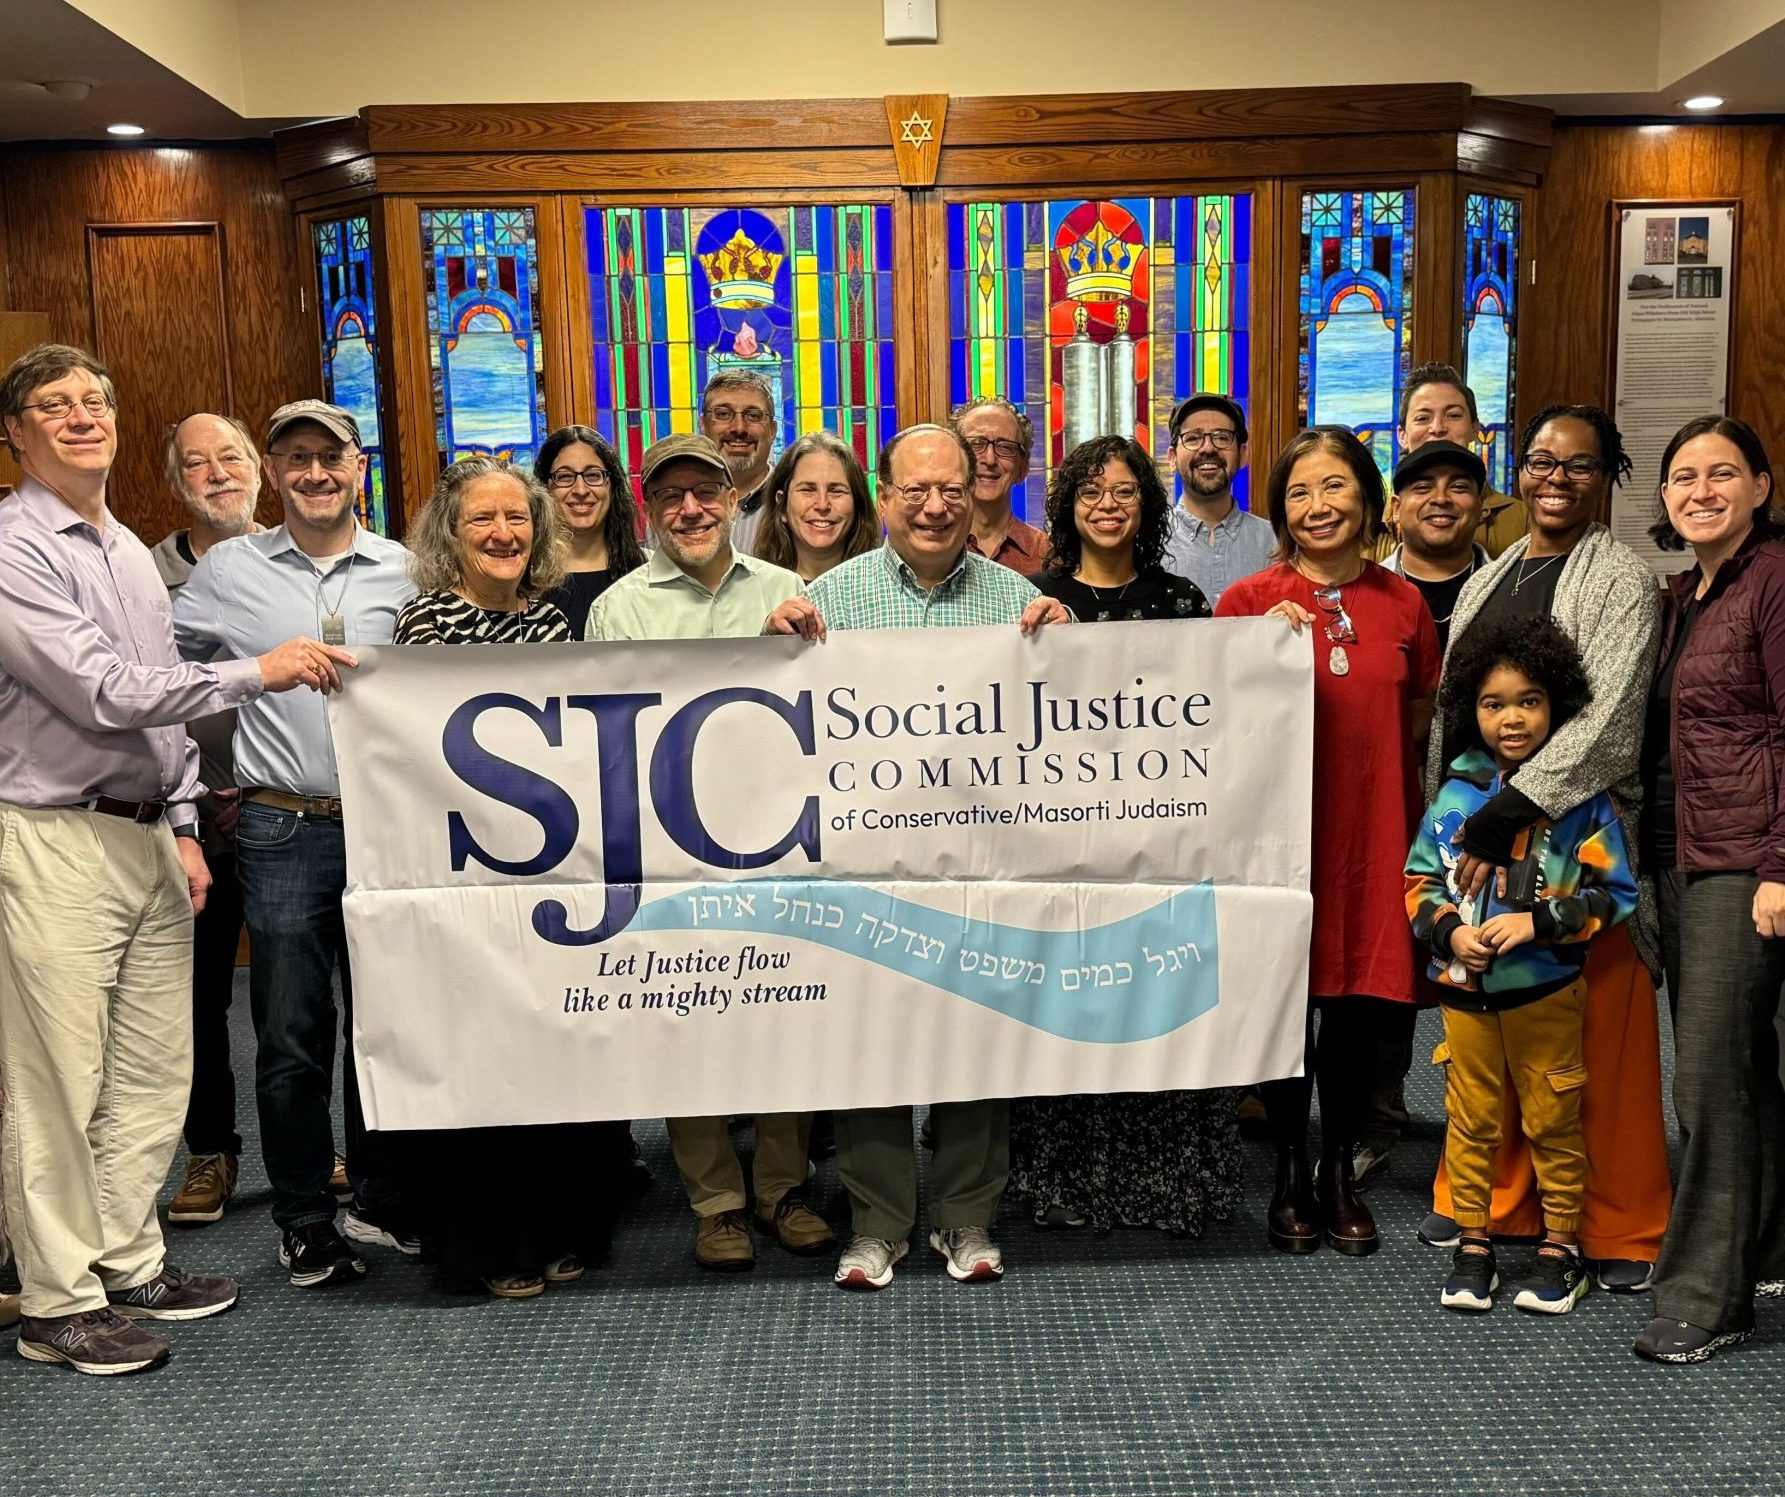 REFLECTIONS ON THE CONSERVATIVE/MASORTI RACIAL JUSTICE PILGRIMAGE